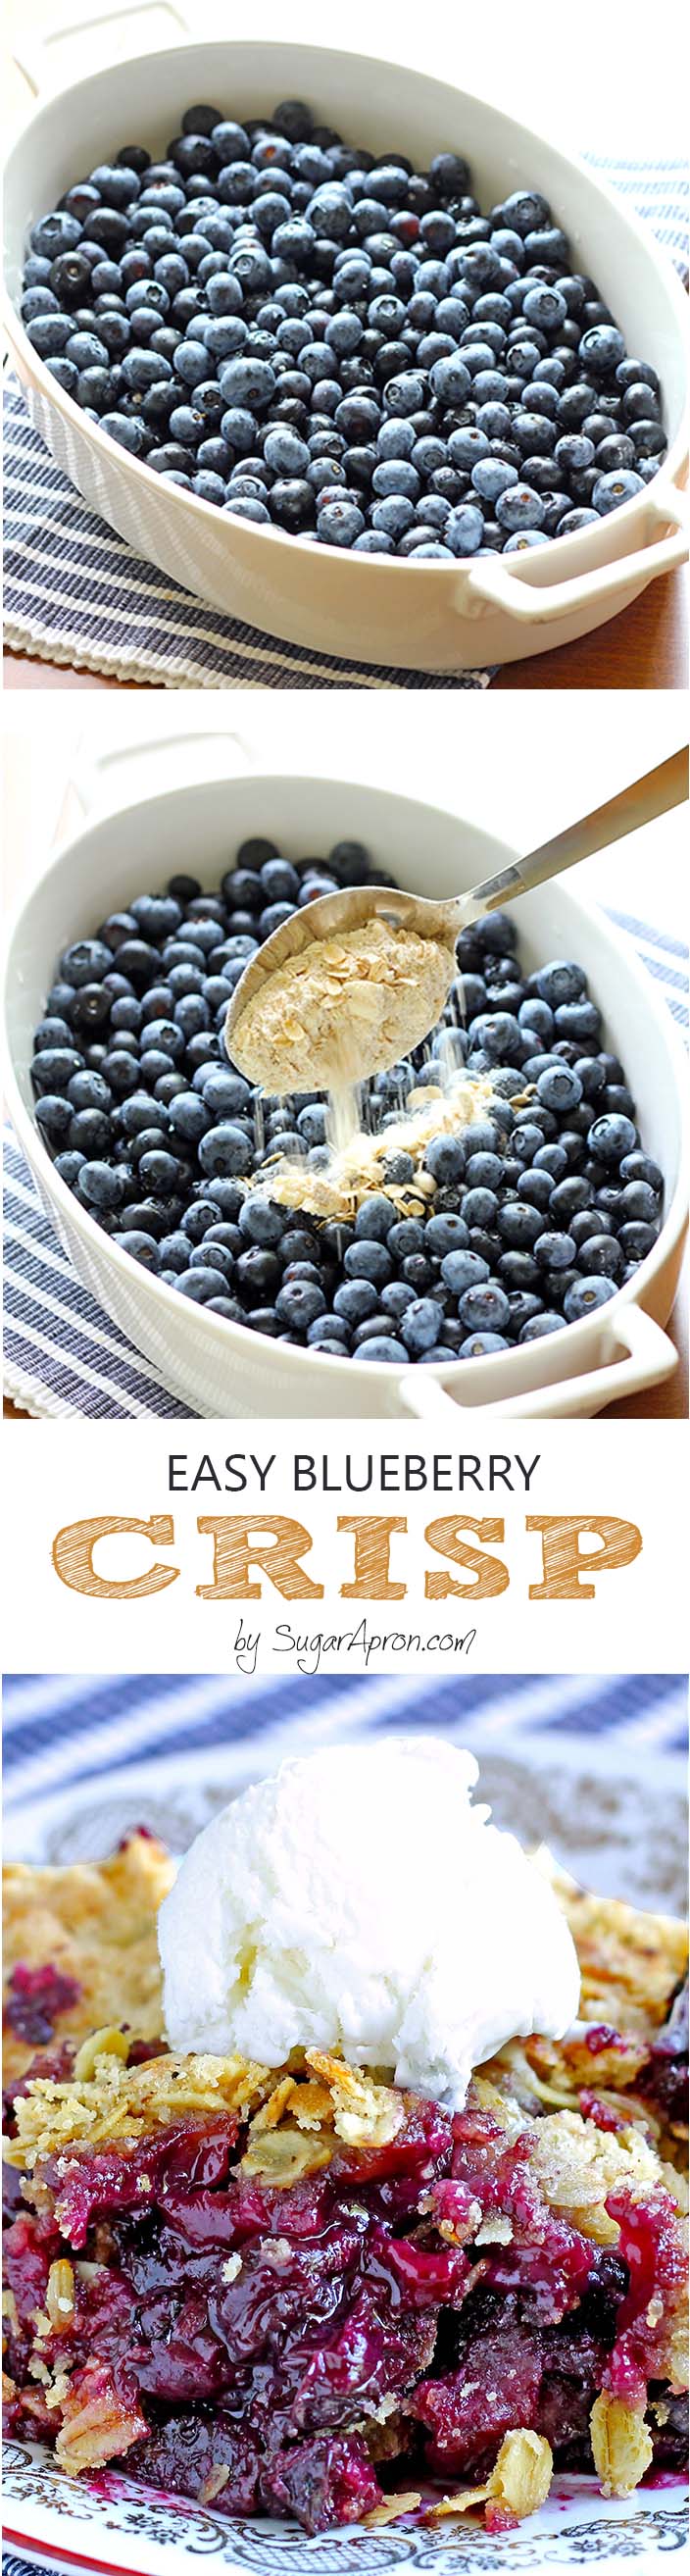 Is there any better way to enjoy blueberries than easy blueberry crisp recipe?